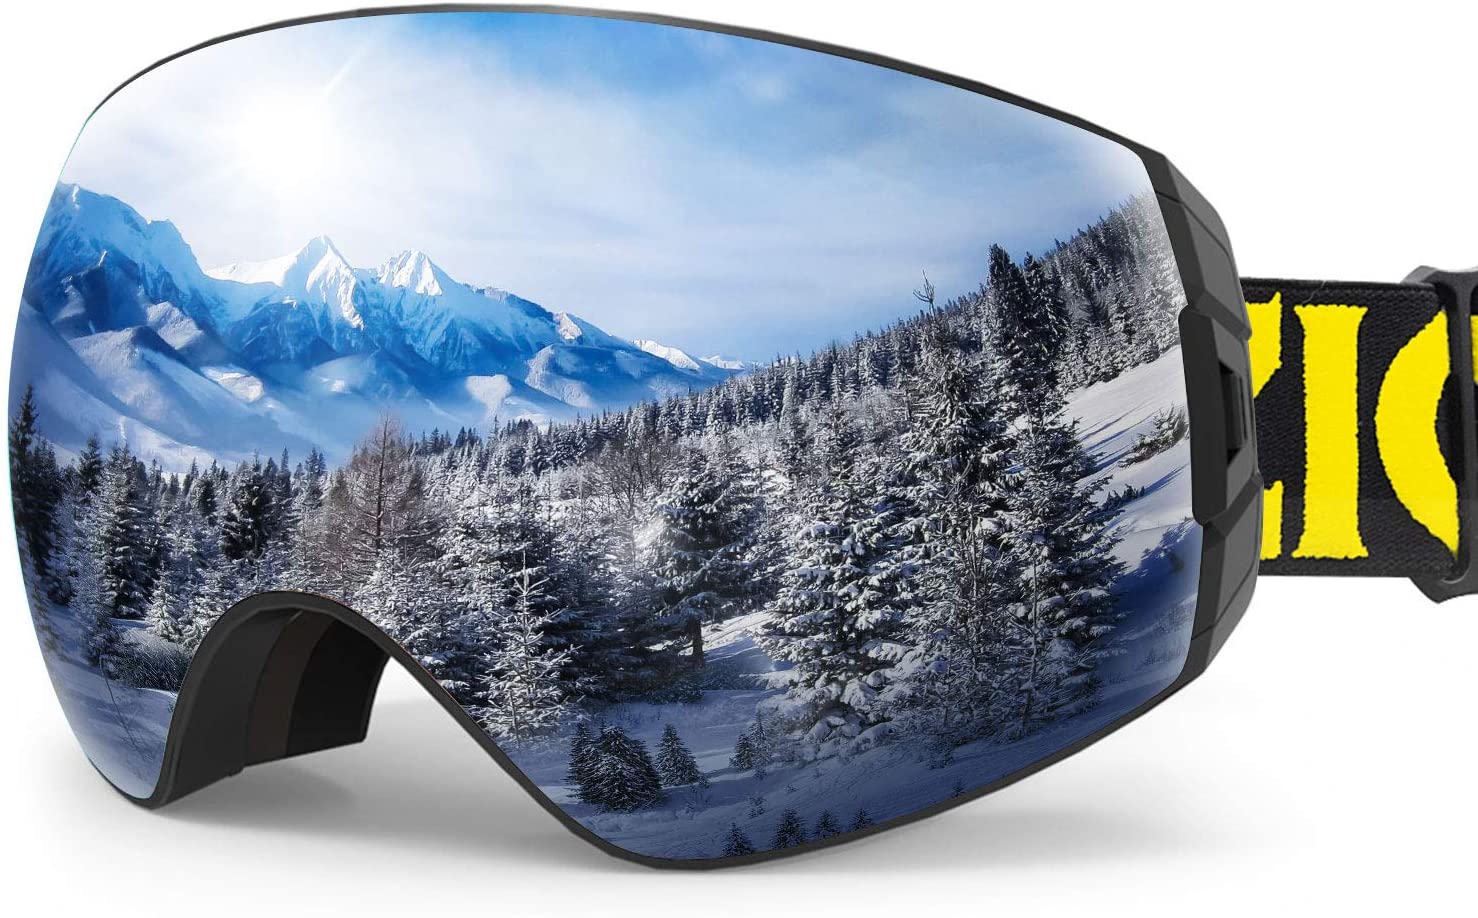 ZIONOR X3 Ski Snowboard Snow Goggles with Magnet Lens Anti-Fog UV Protection Spherial Design for Men Women Adult